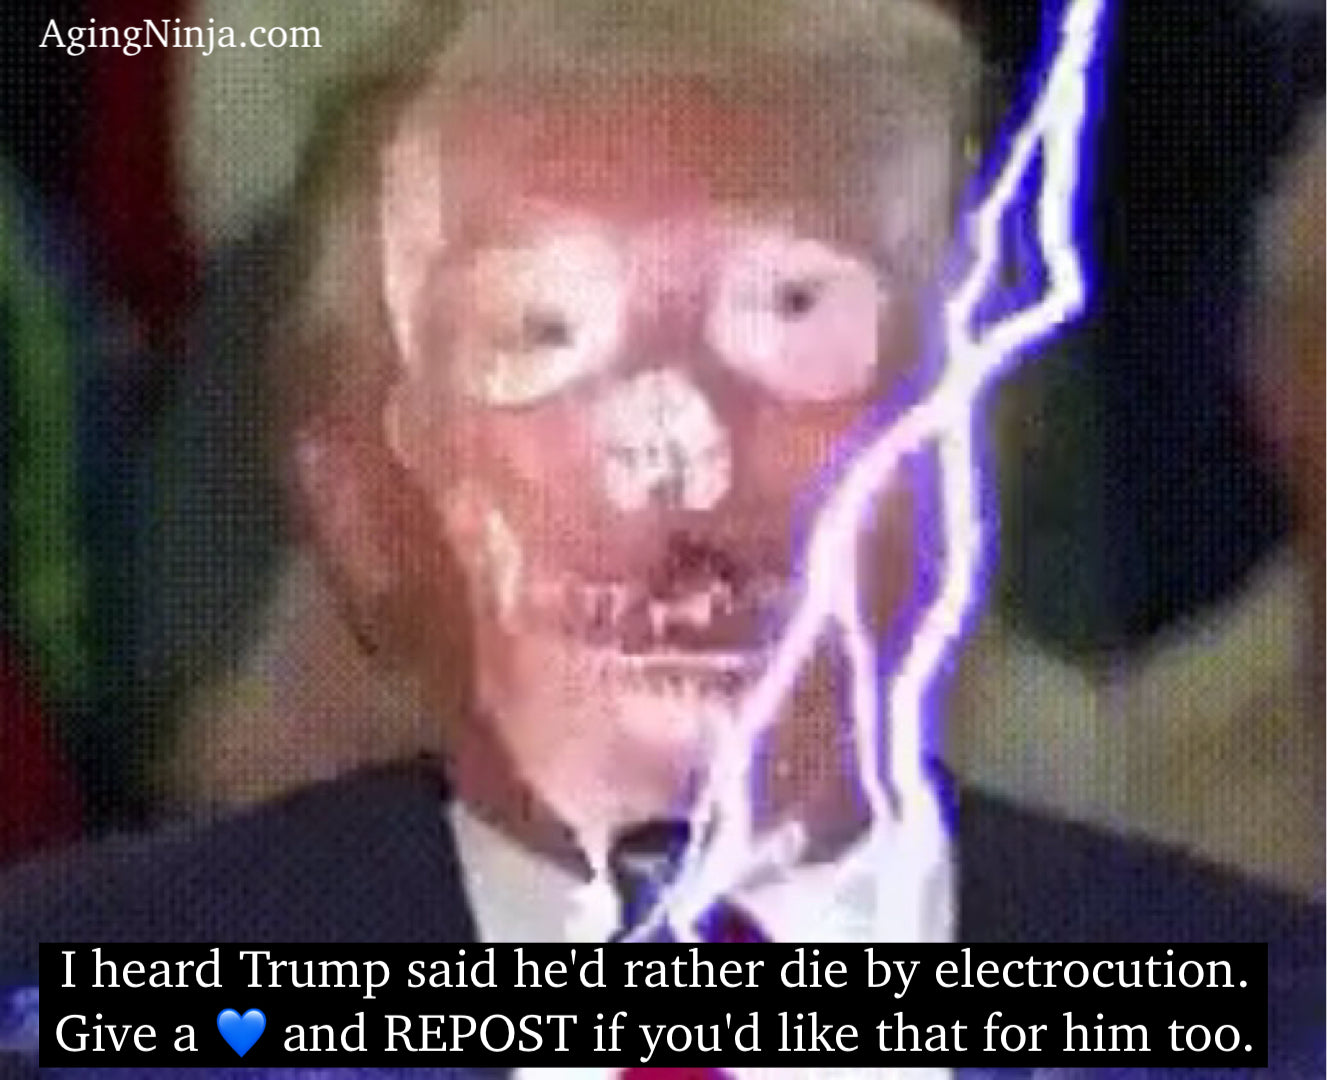 Trump said he’d rather die by electrocution